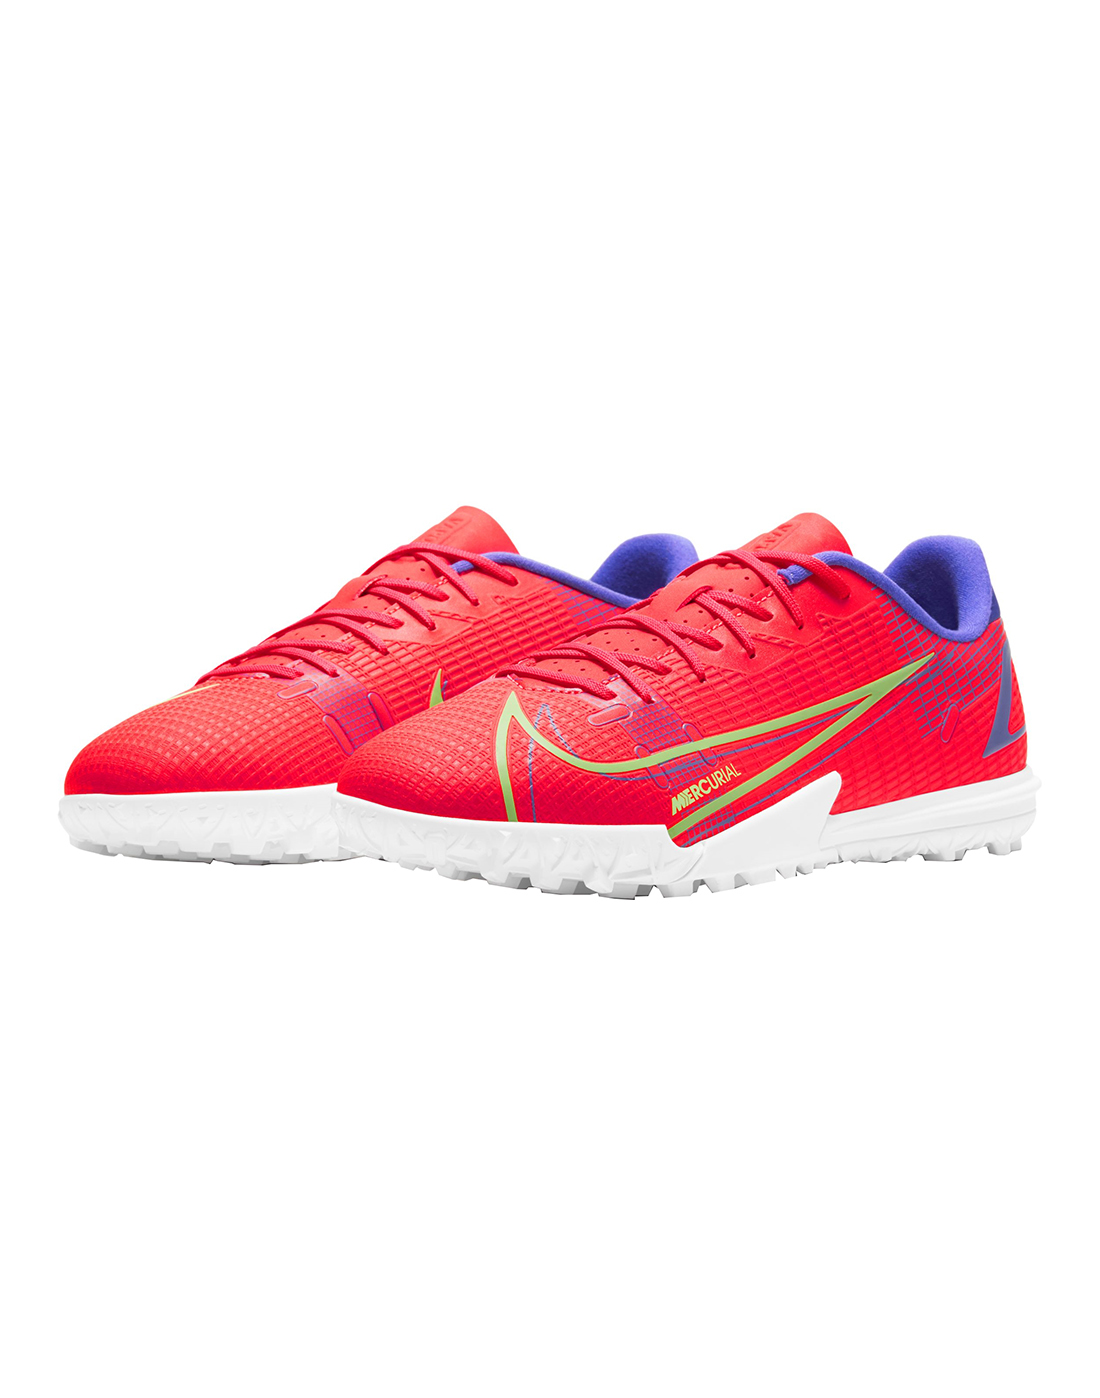 Nike Kids Mercurial Vapor Academy Astro Turf - Red | Life Style Sports IE